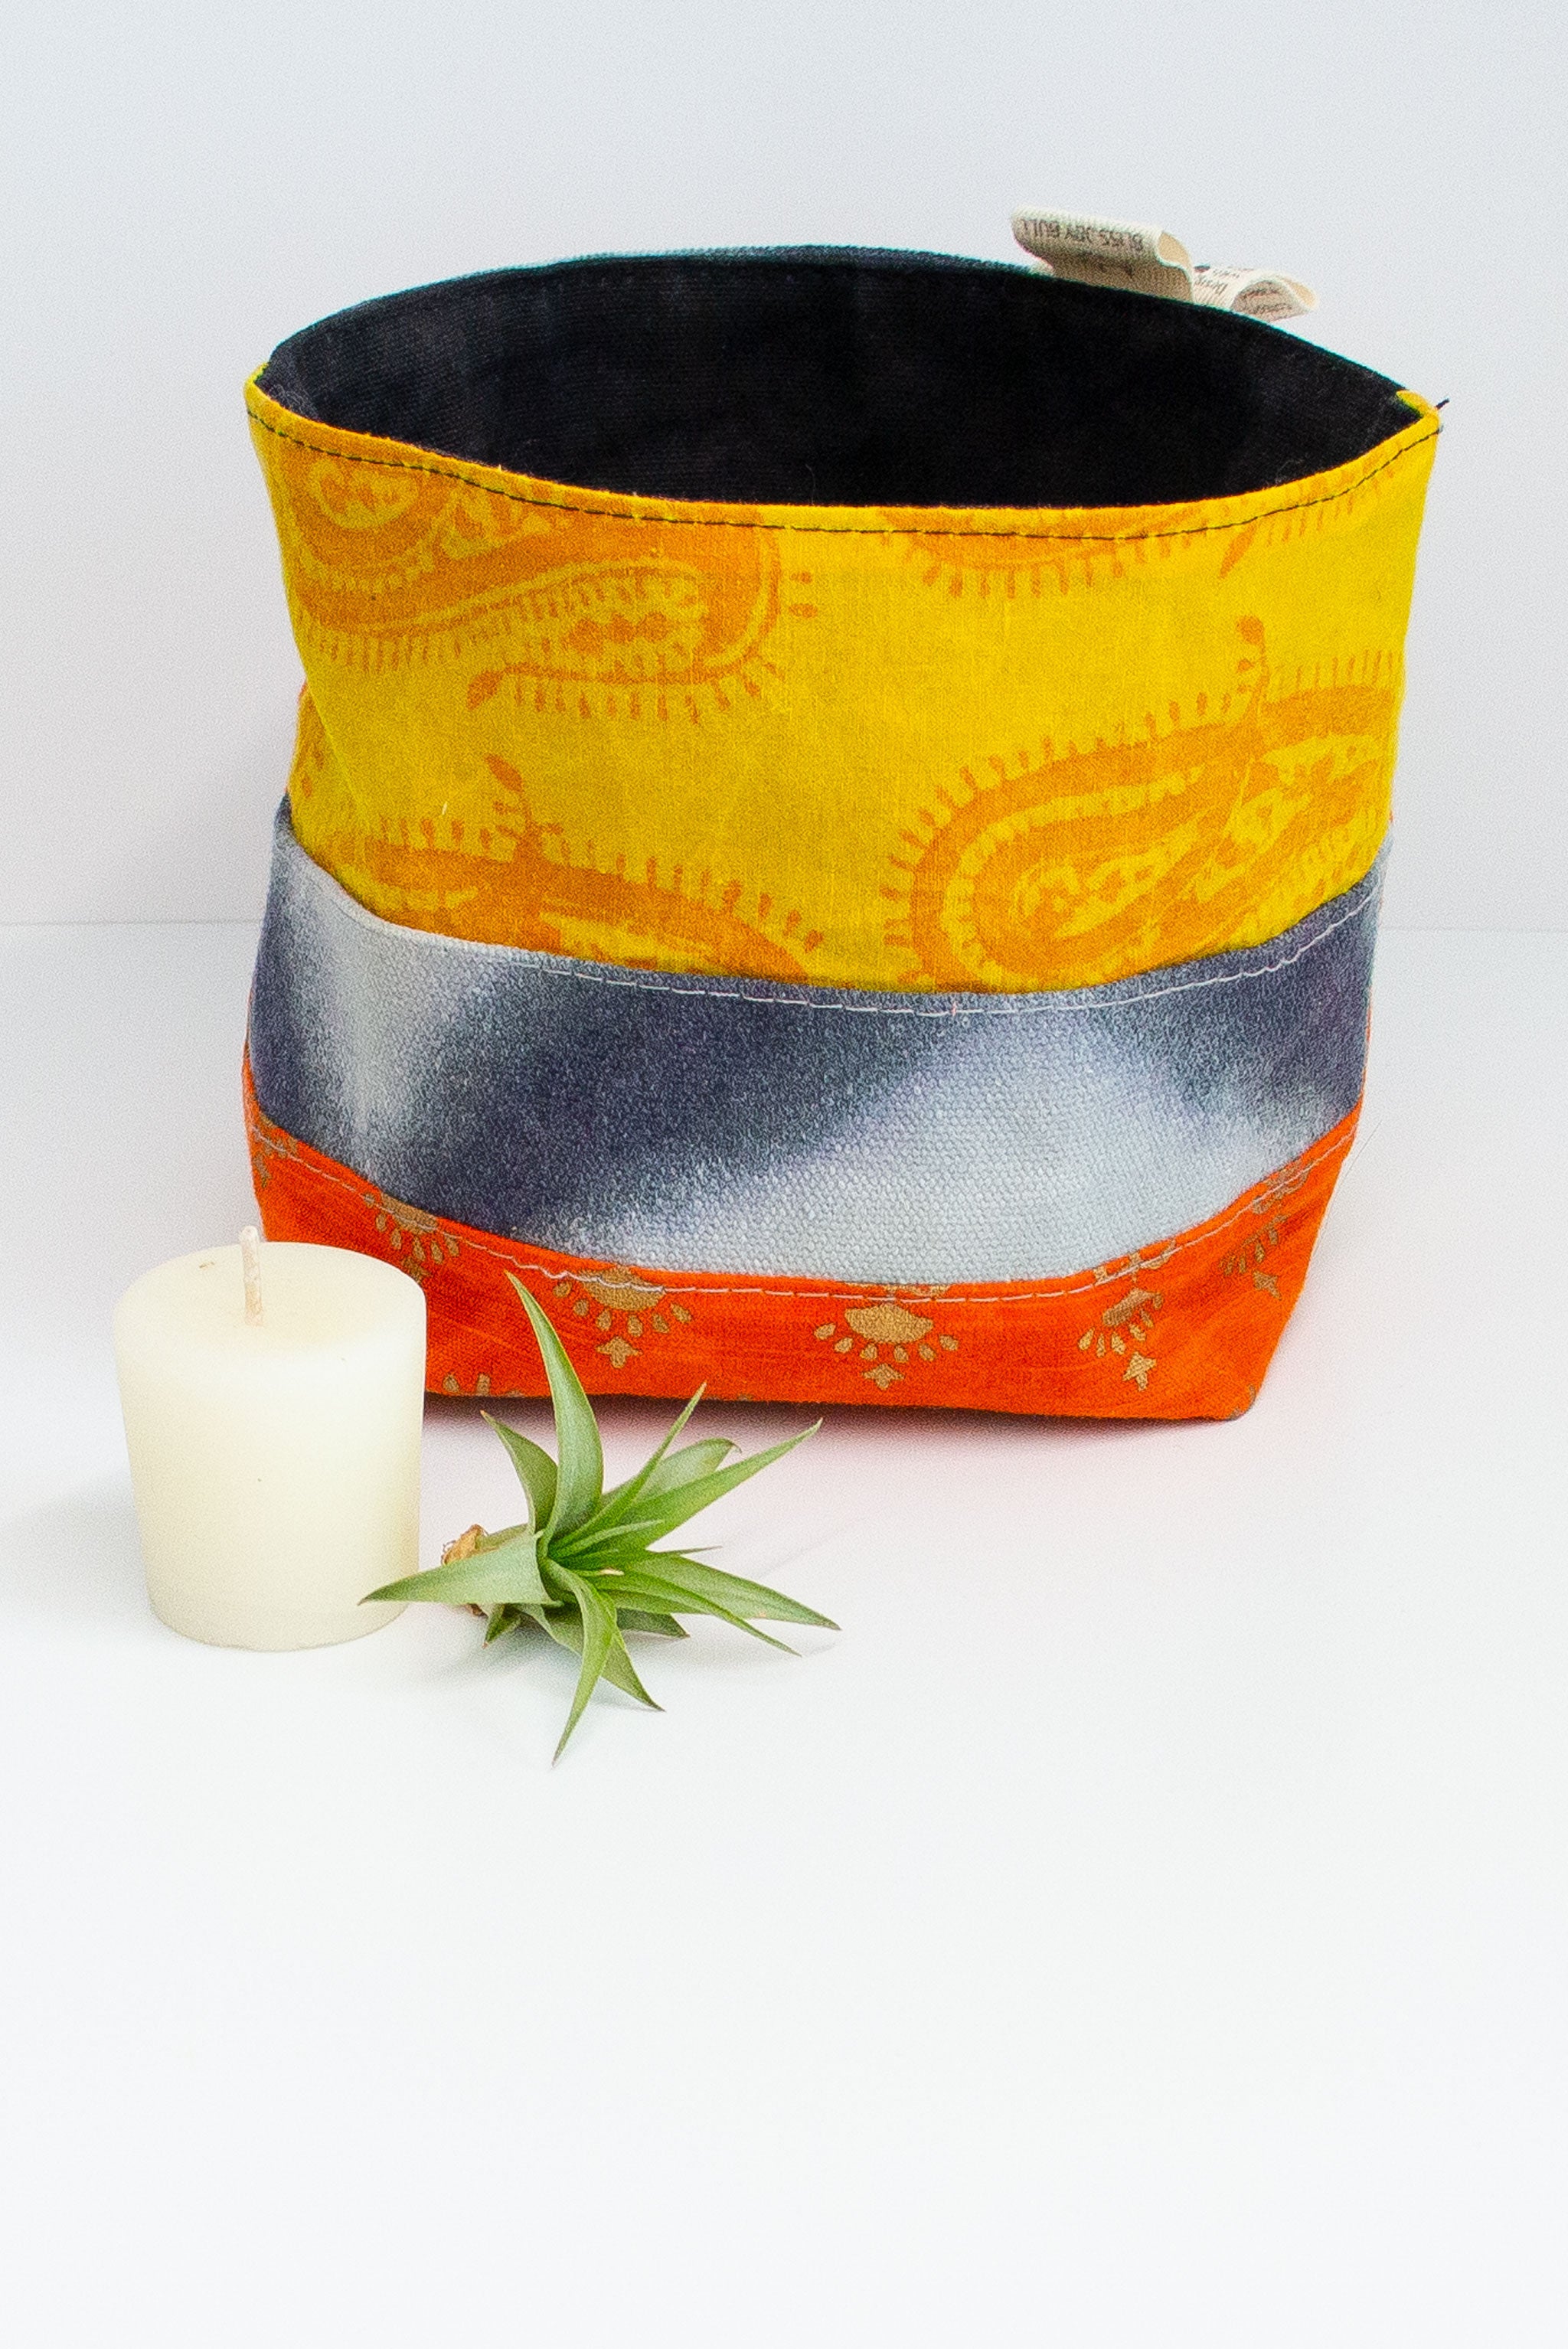 Patchwork fabric basket in yellow with darker yellow paisley pattern, with with dip dyed blue pattern, and orange with gold pattern. Solid black lining. A small votive candle and air plant sit next to it on a white background. 